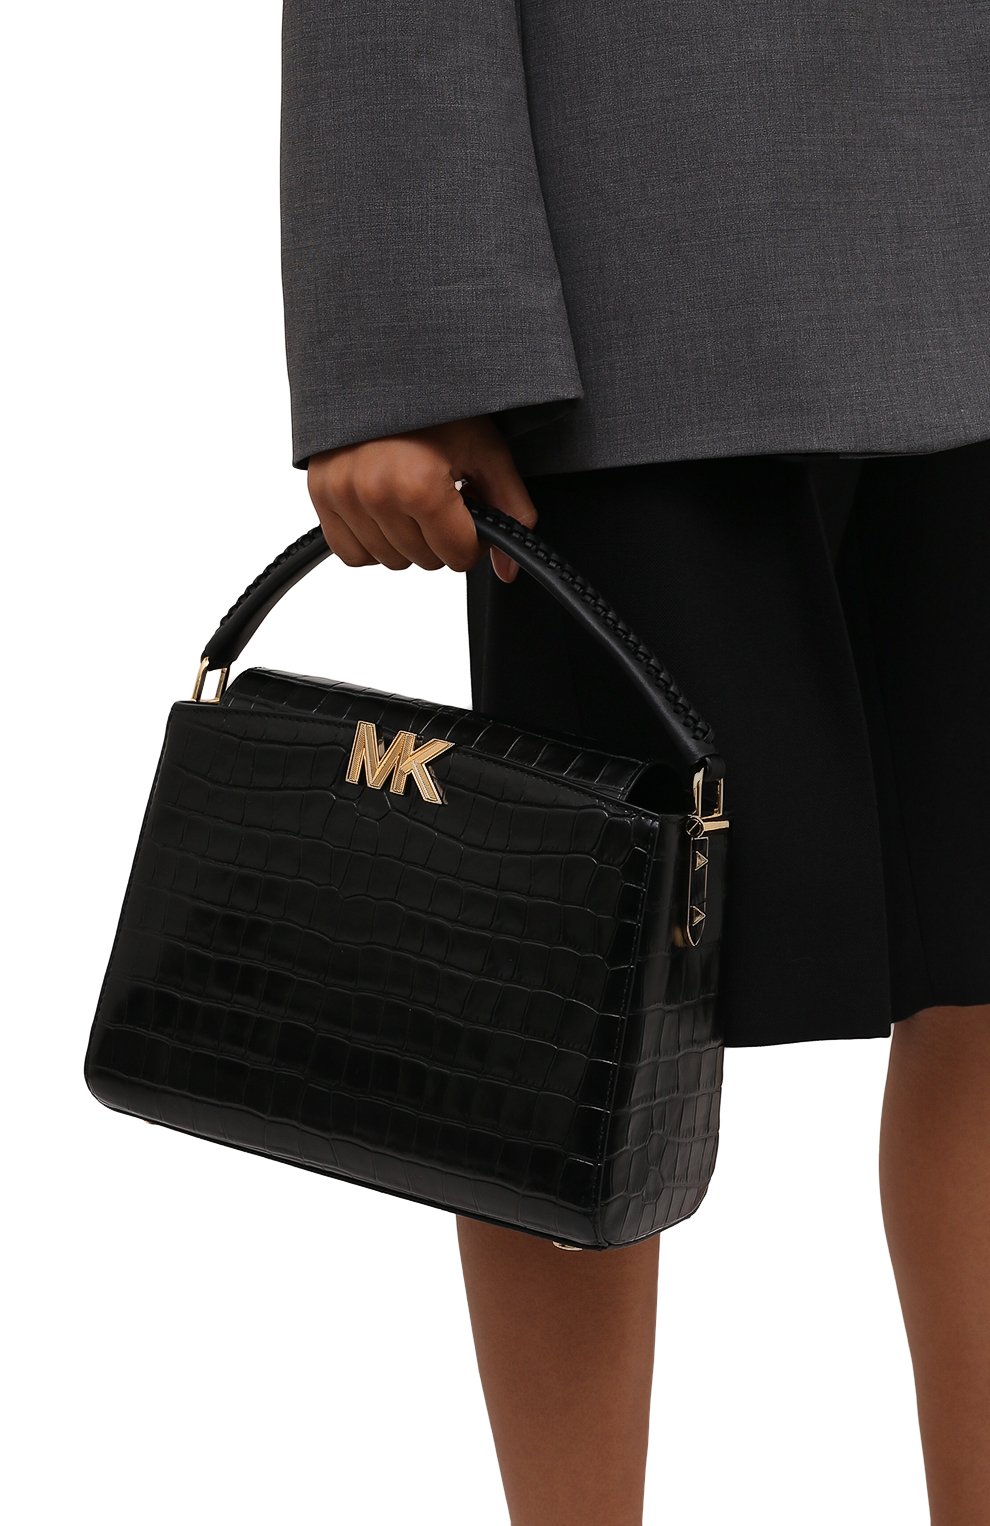 25 Brands Like Michael Kors For Gorgeous, Affordable Bags |  